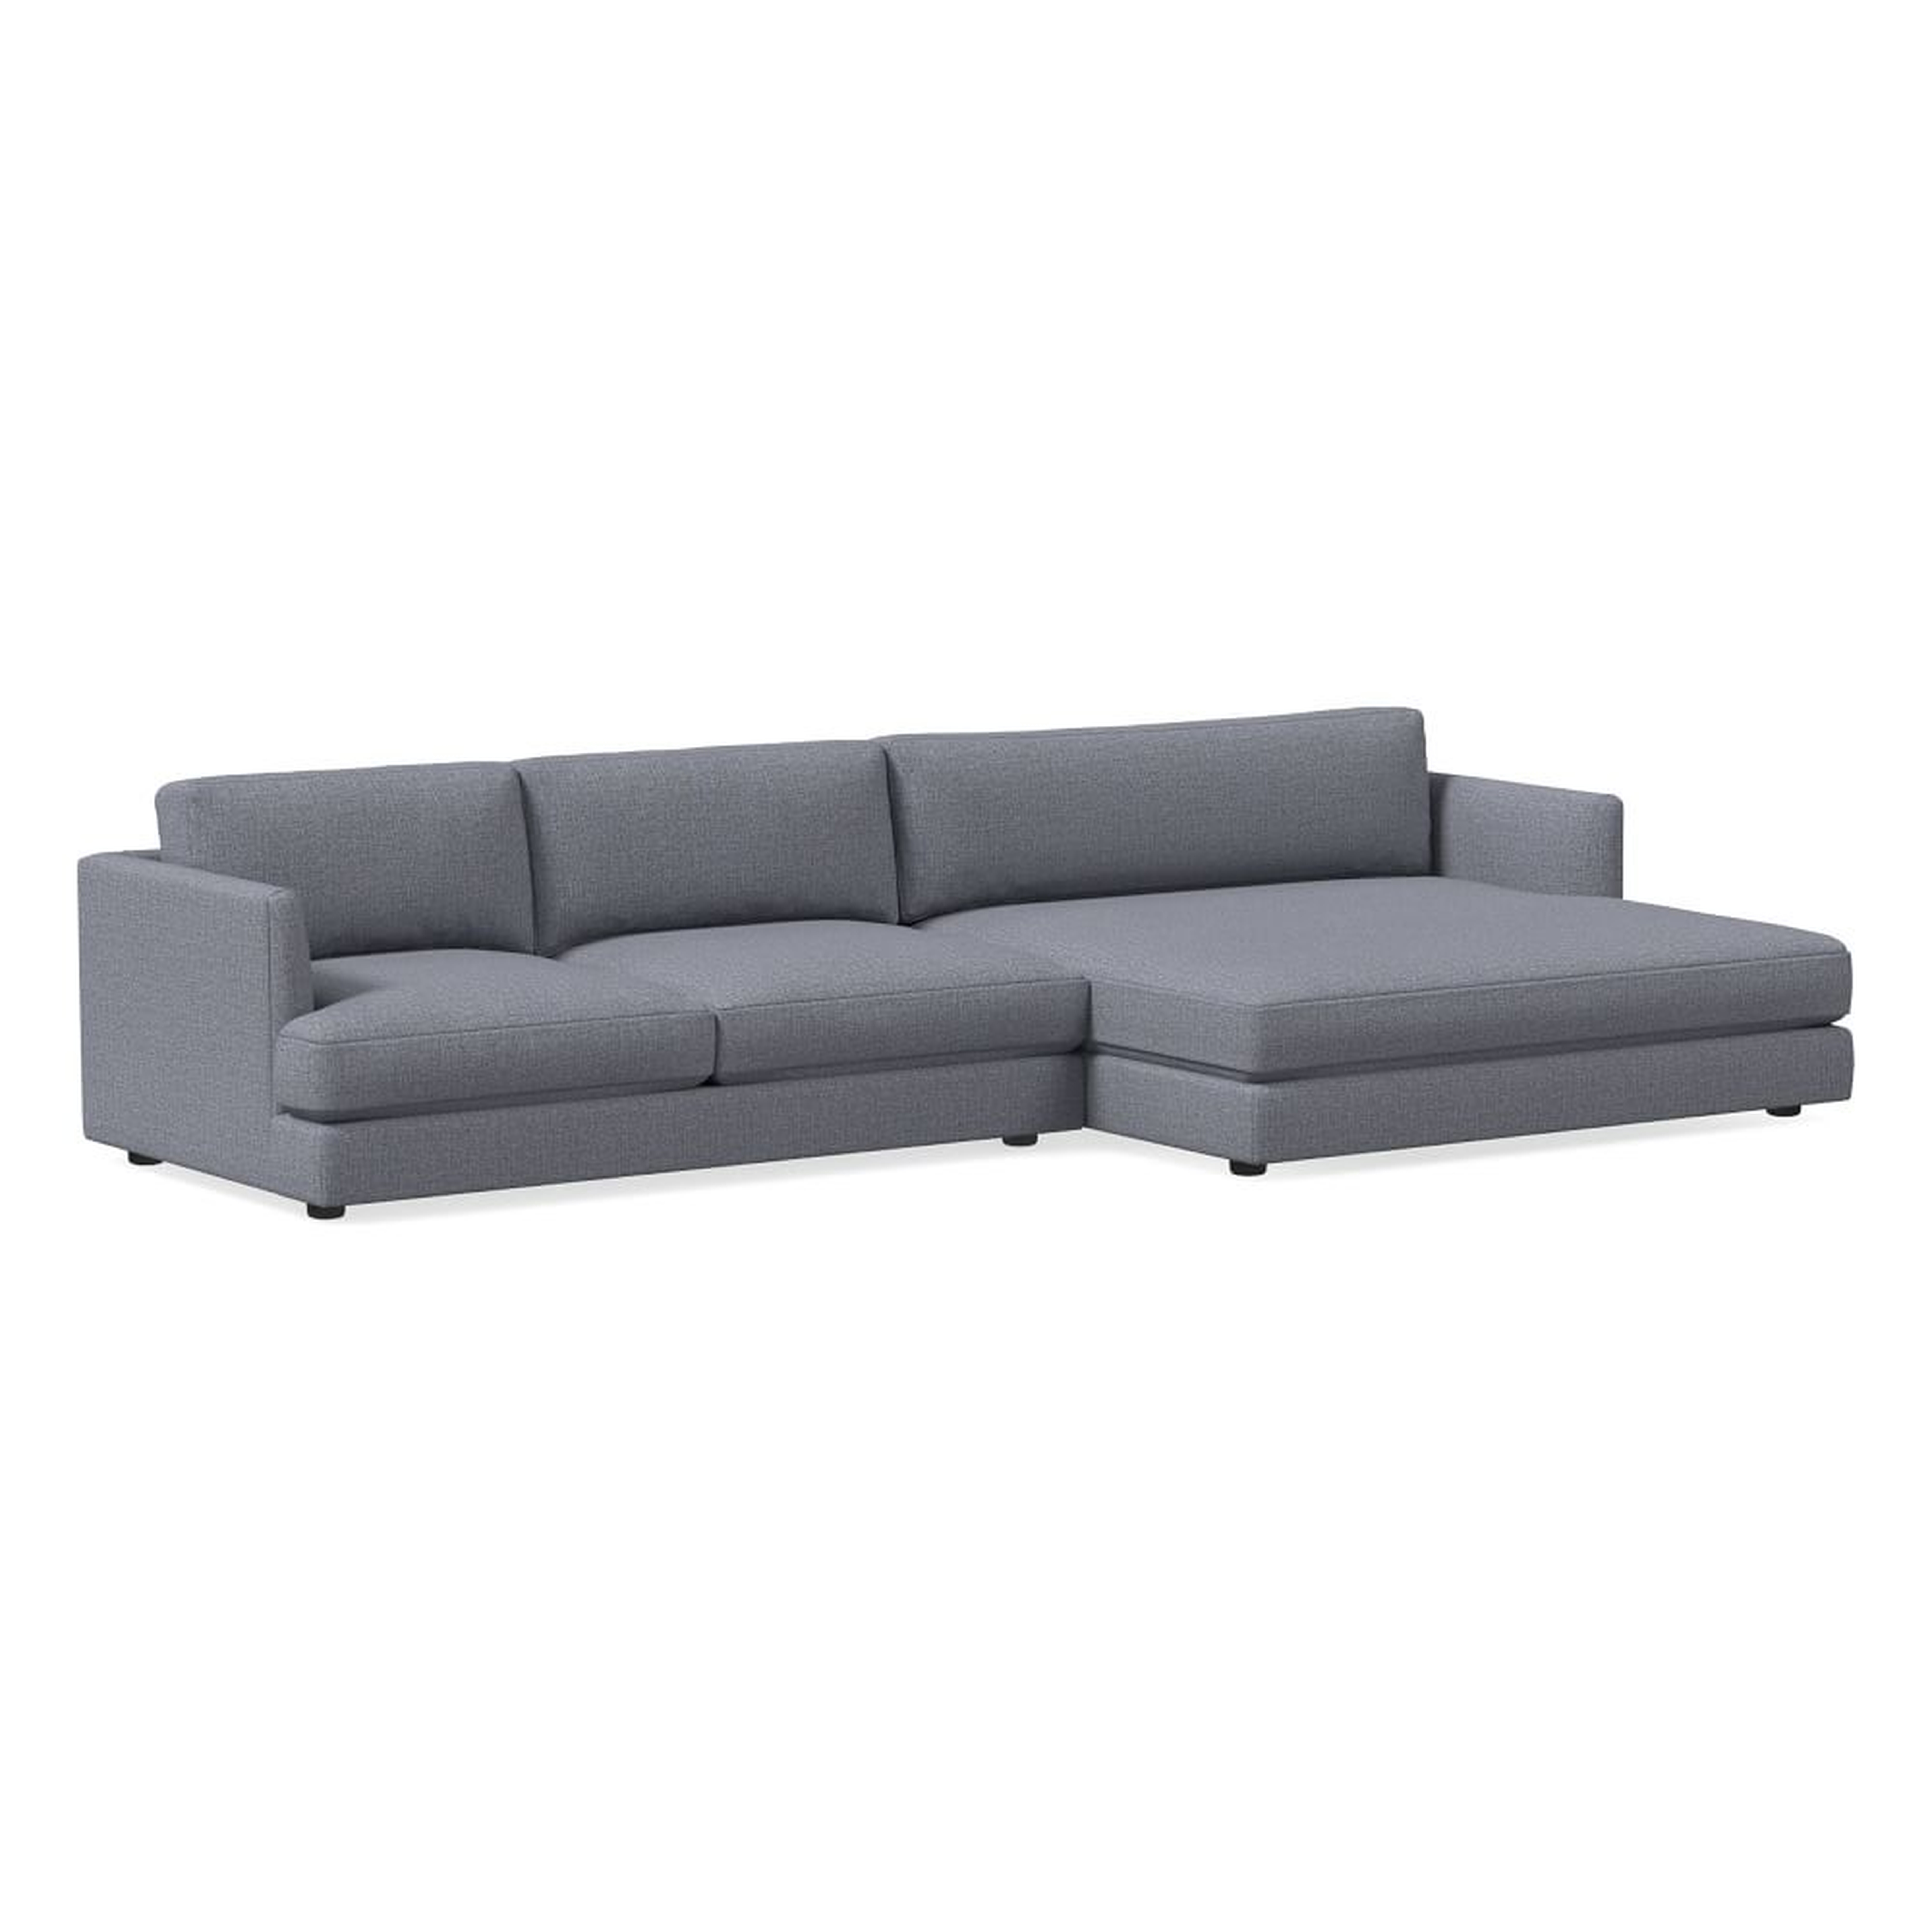 Haven 127" Right Multi Seat Double Wide Chaise Sectional, Standard Depth, Yarn Dyed Linen Weave, graphite - West Elm